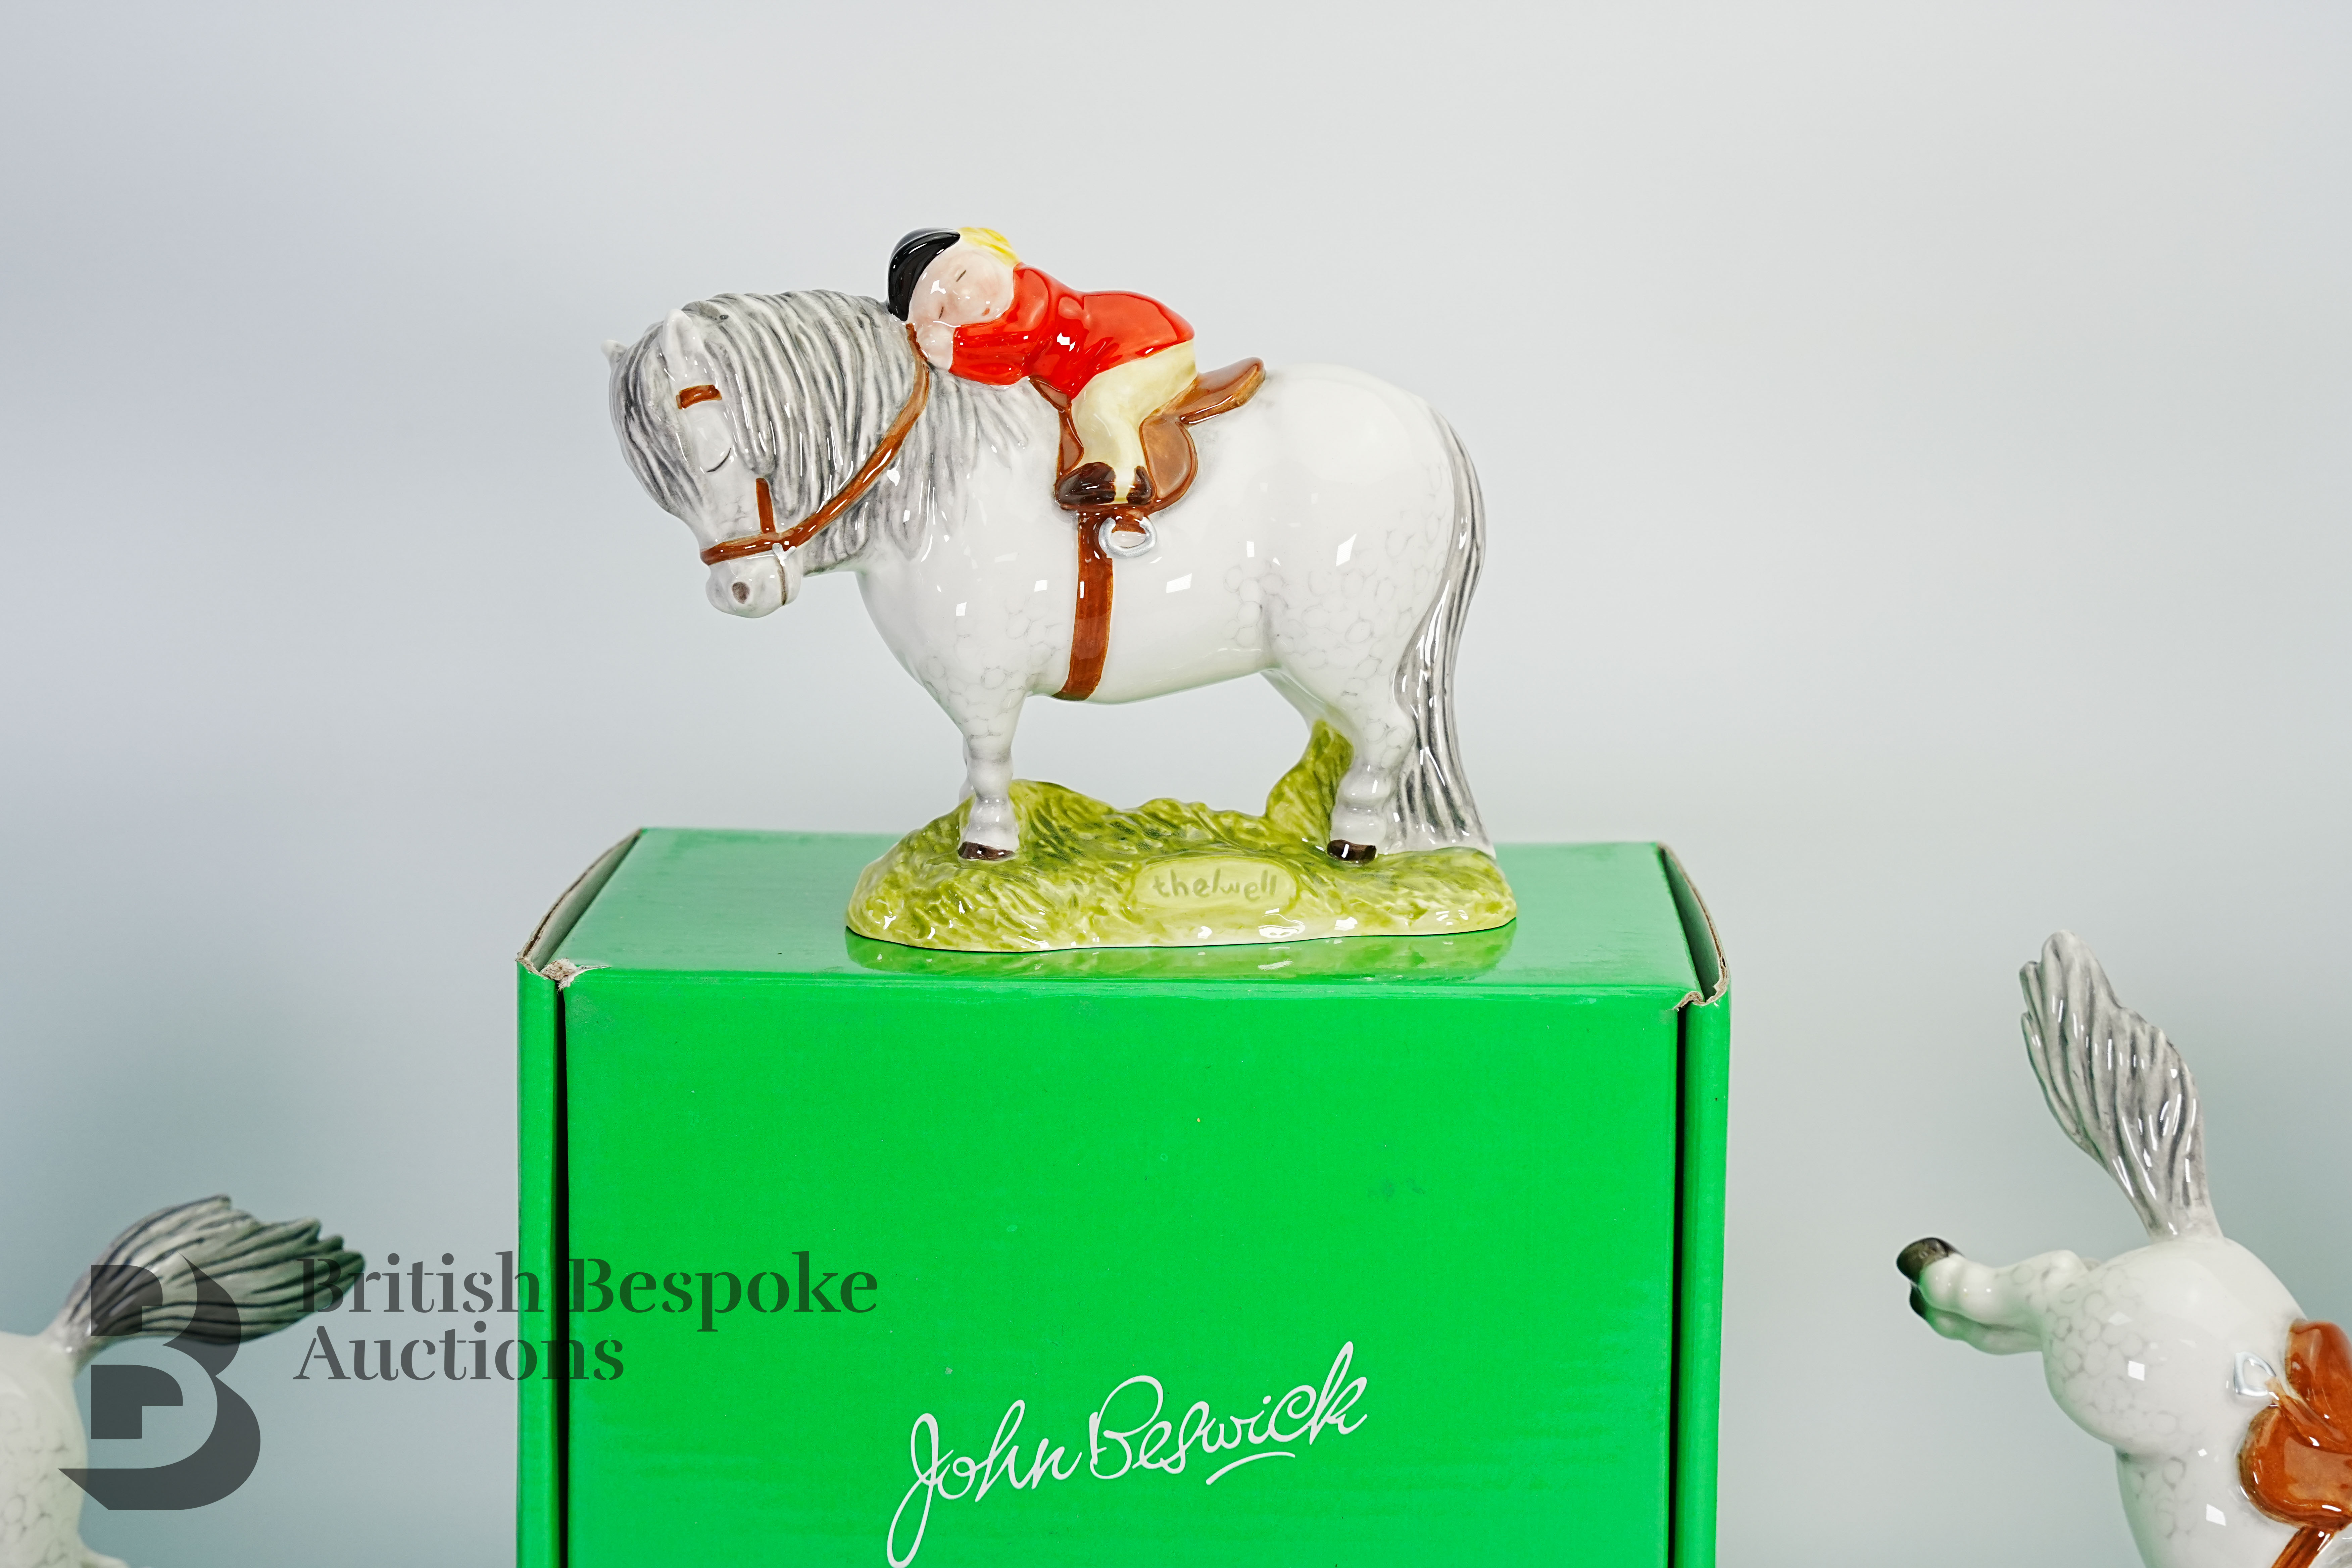 John Beswick Hand Painted Norman Thelwell Figurines - Image 6 of 6